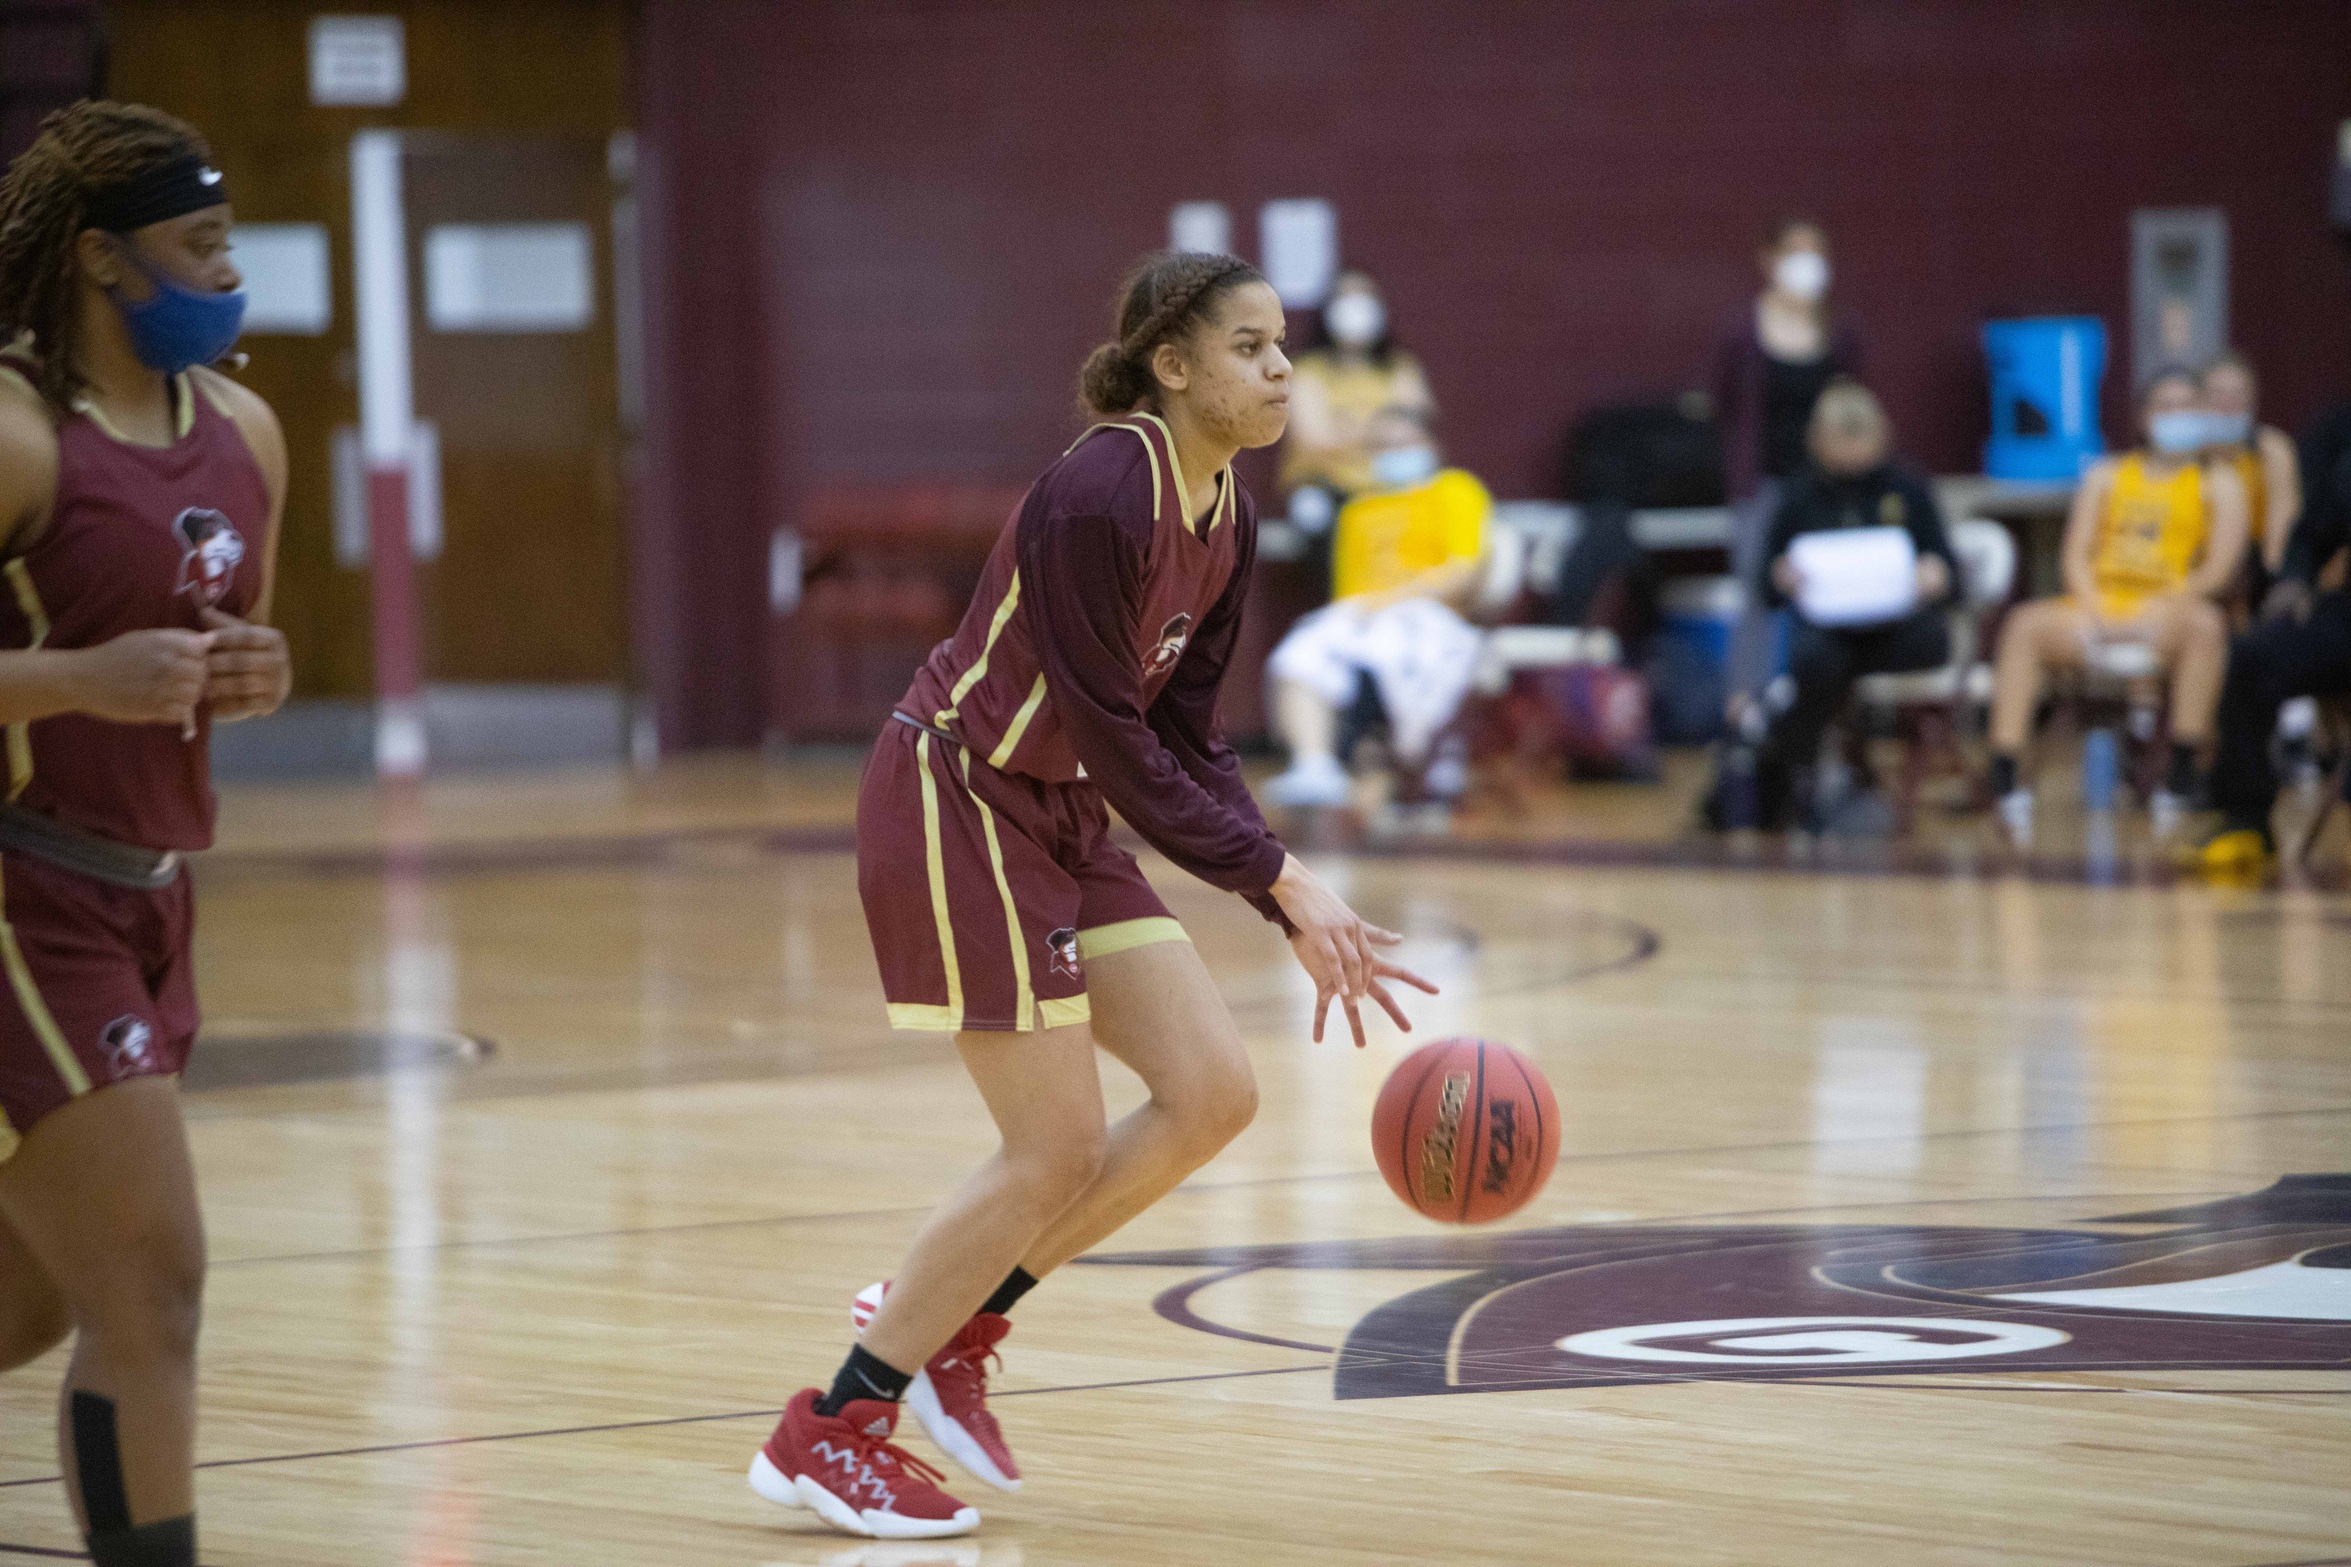 Ladies Fall to Colorado College at Home, 79-55